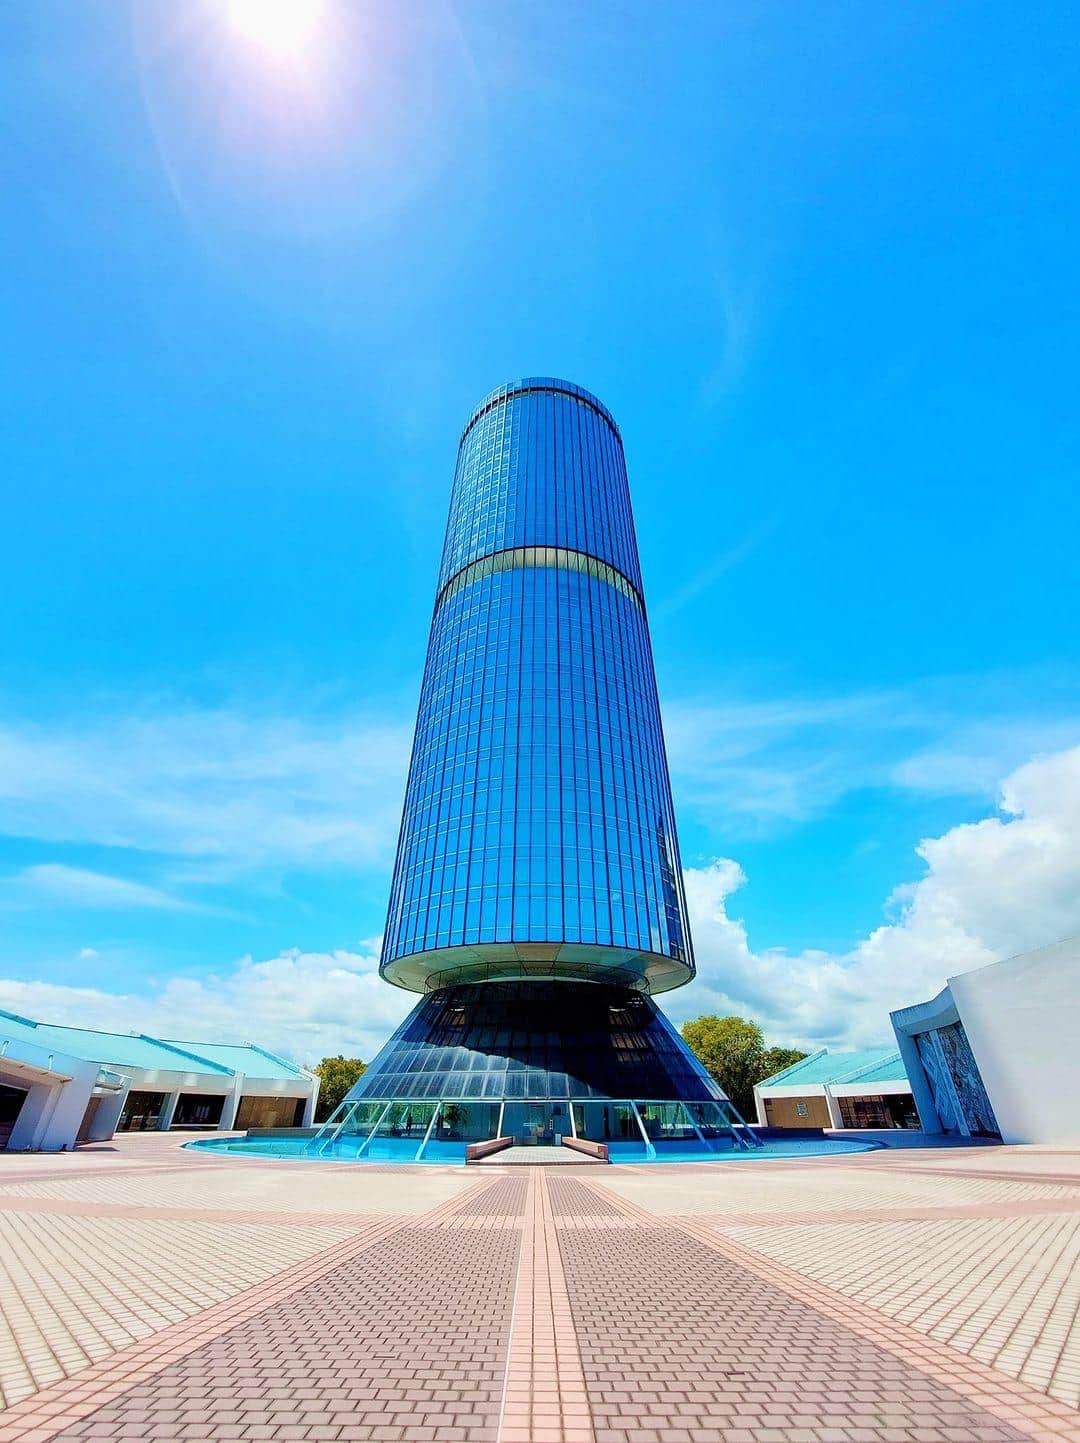 Unique Malaysia buildings - Tun Mustapha Tower